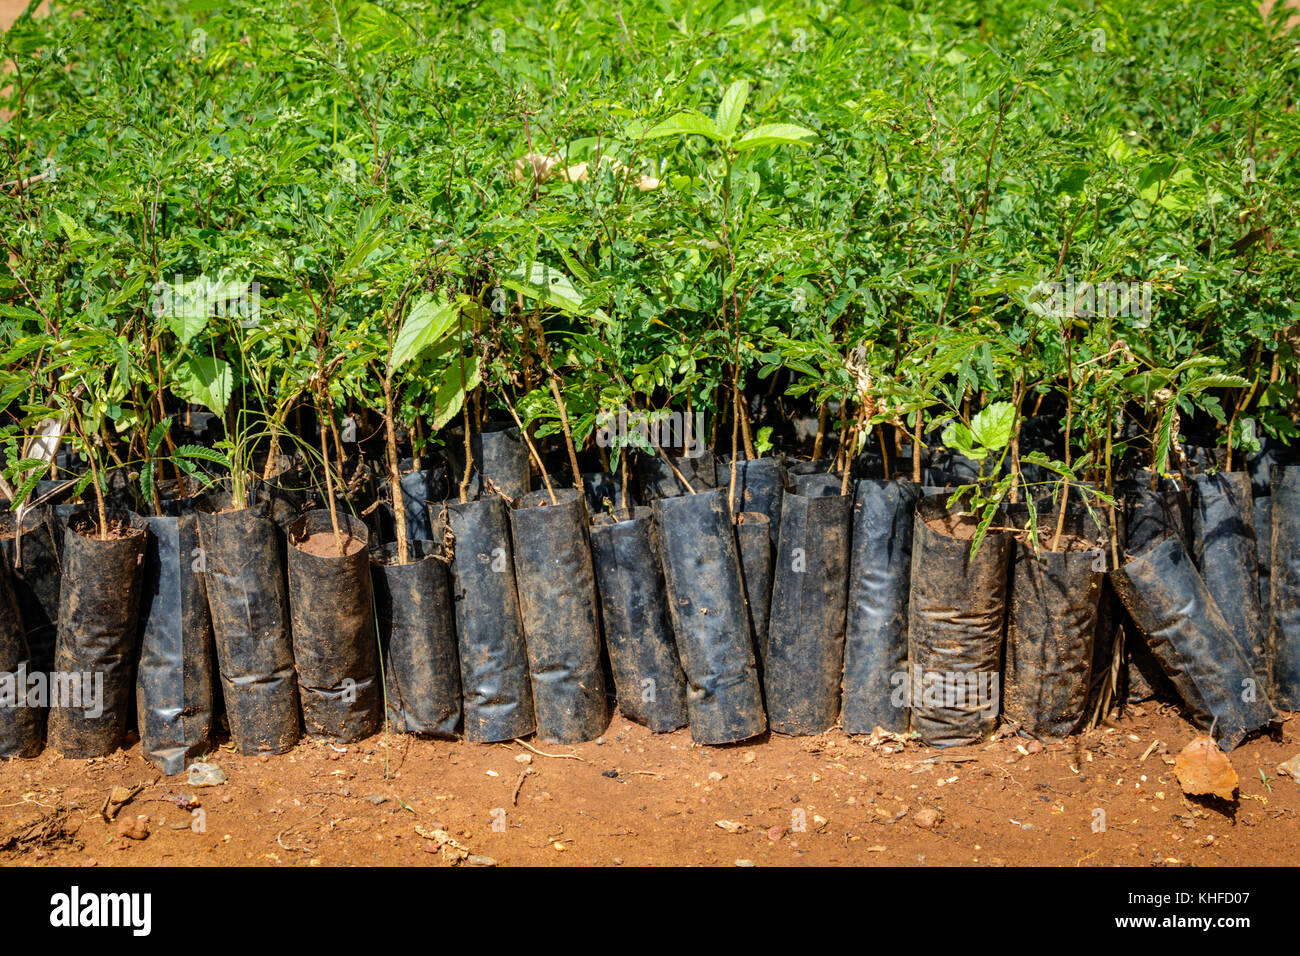 Tree planting Uganda, close up of many small seedlings growing in African soil with plastic protection Stock Photo